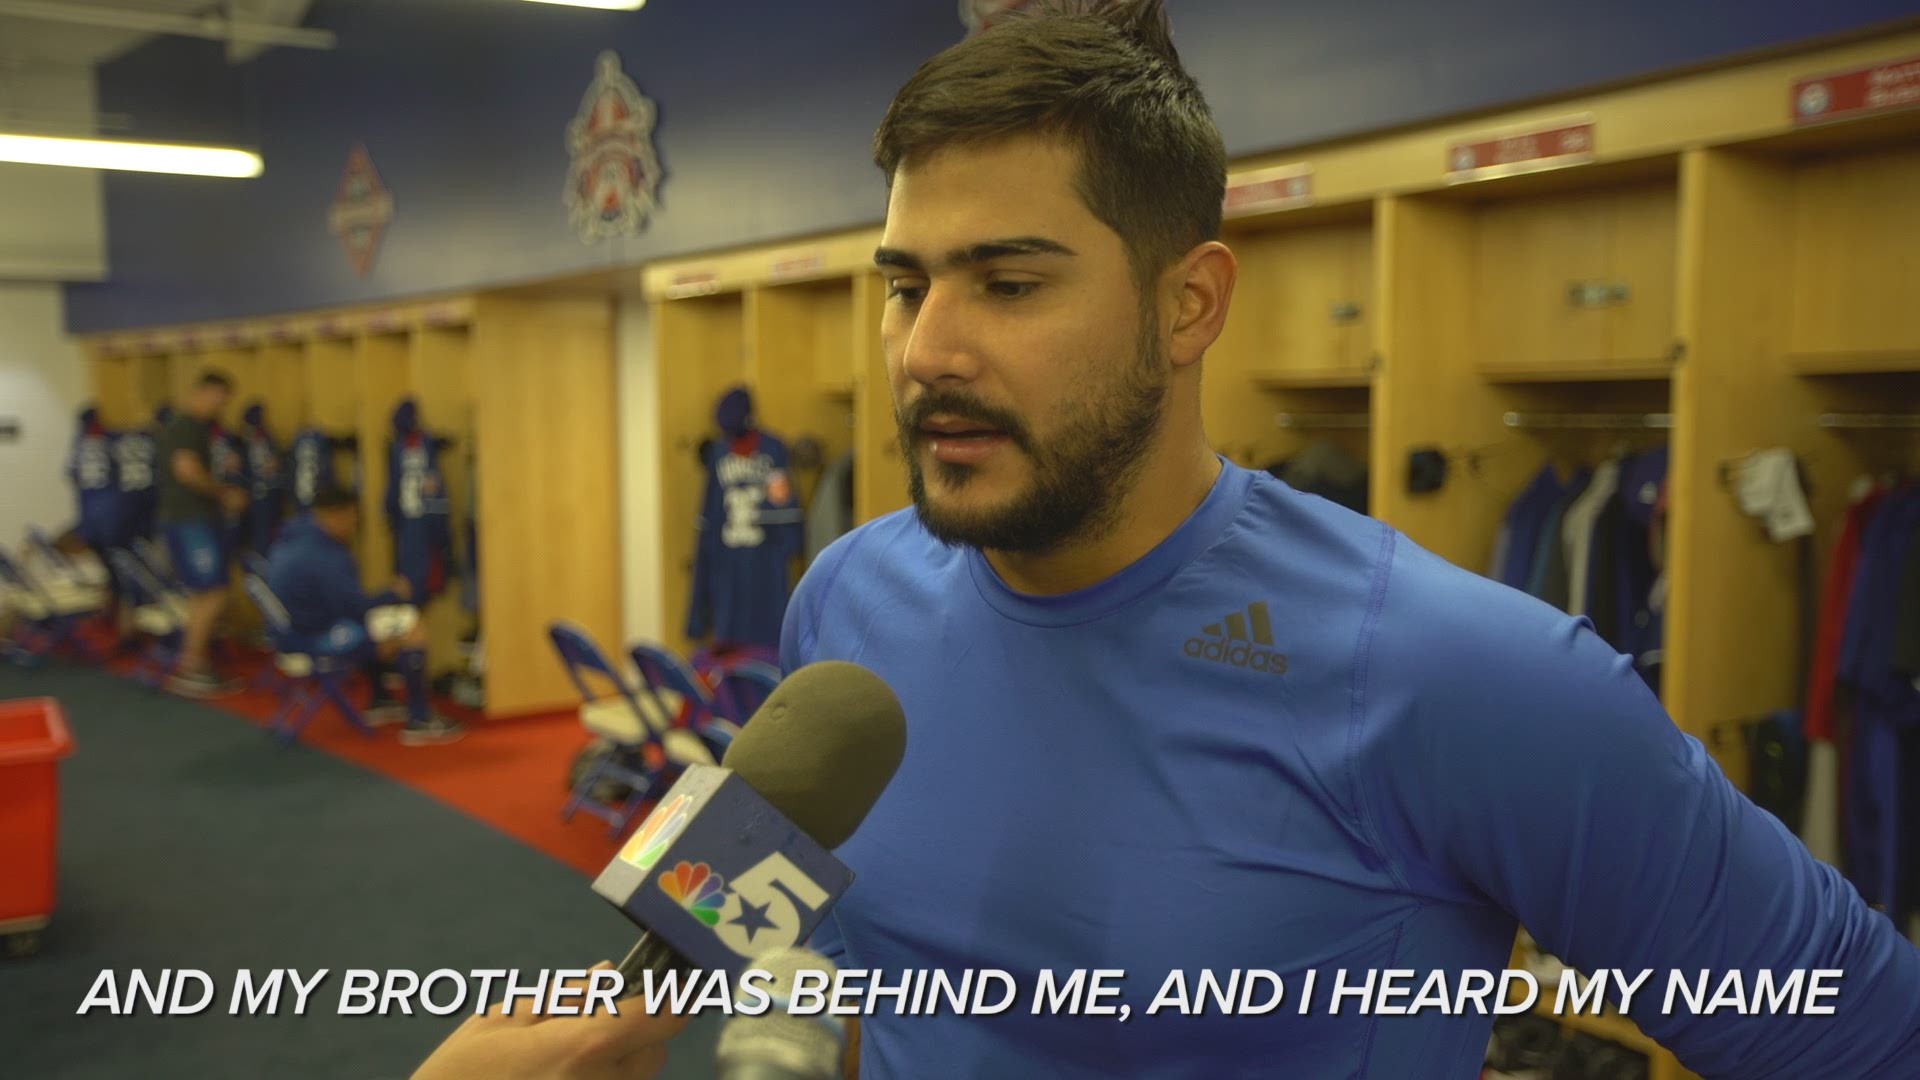 Rangers starting pitcher Martin Perez explains the injury he suffered on his cattle farm in Venezuela. WFAA.com